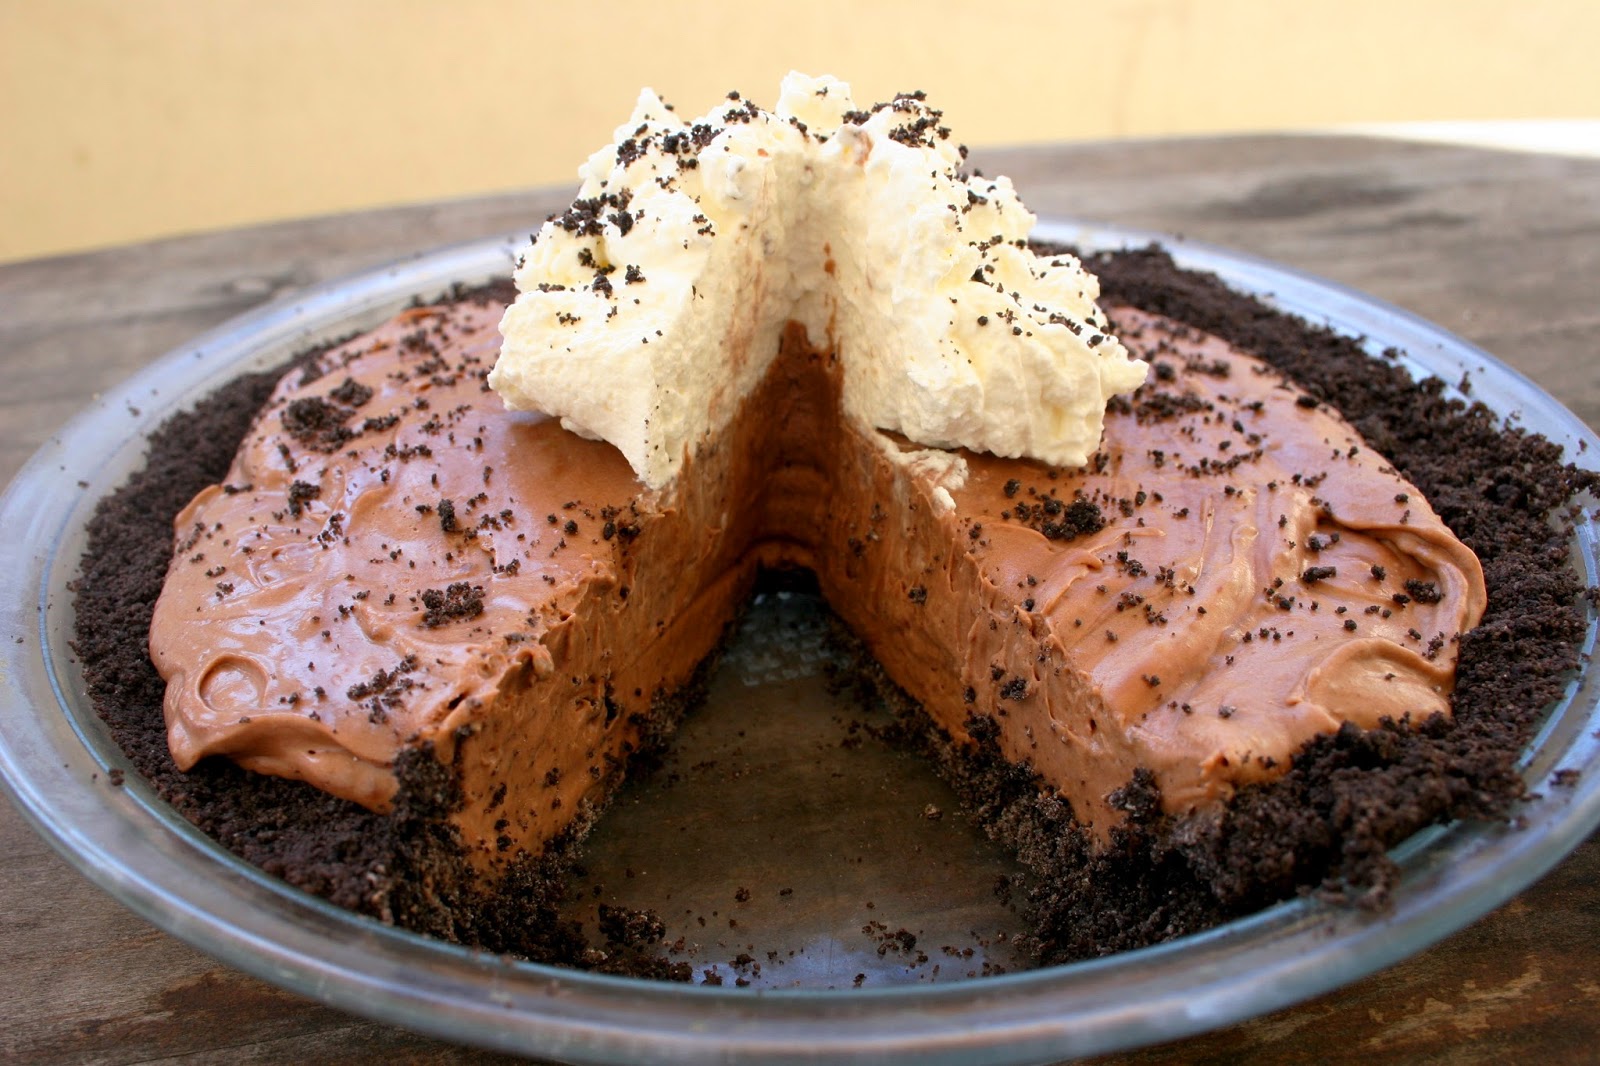 Nutella Icebox Pie with Whipped Cream and Oreos, Cross Section